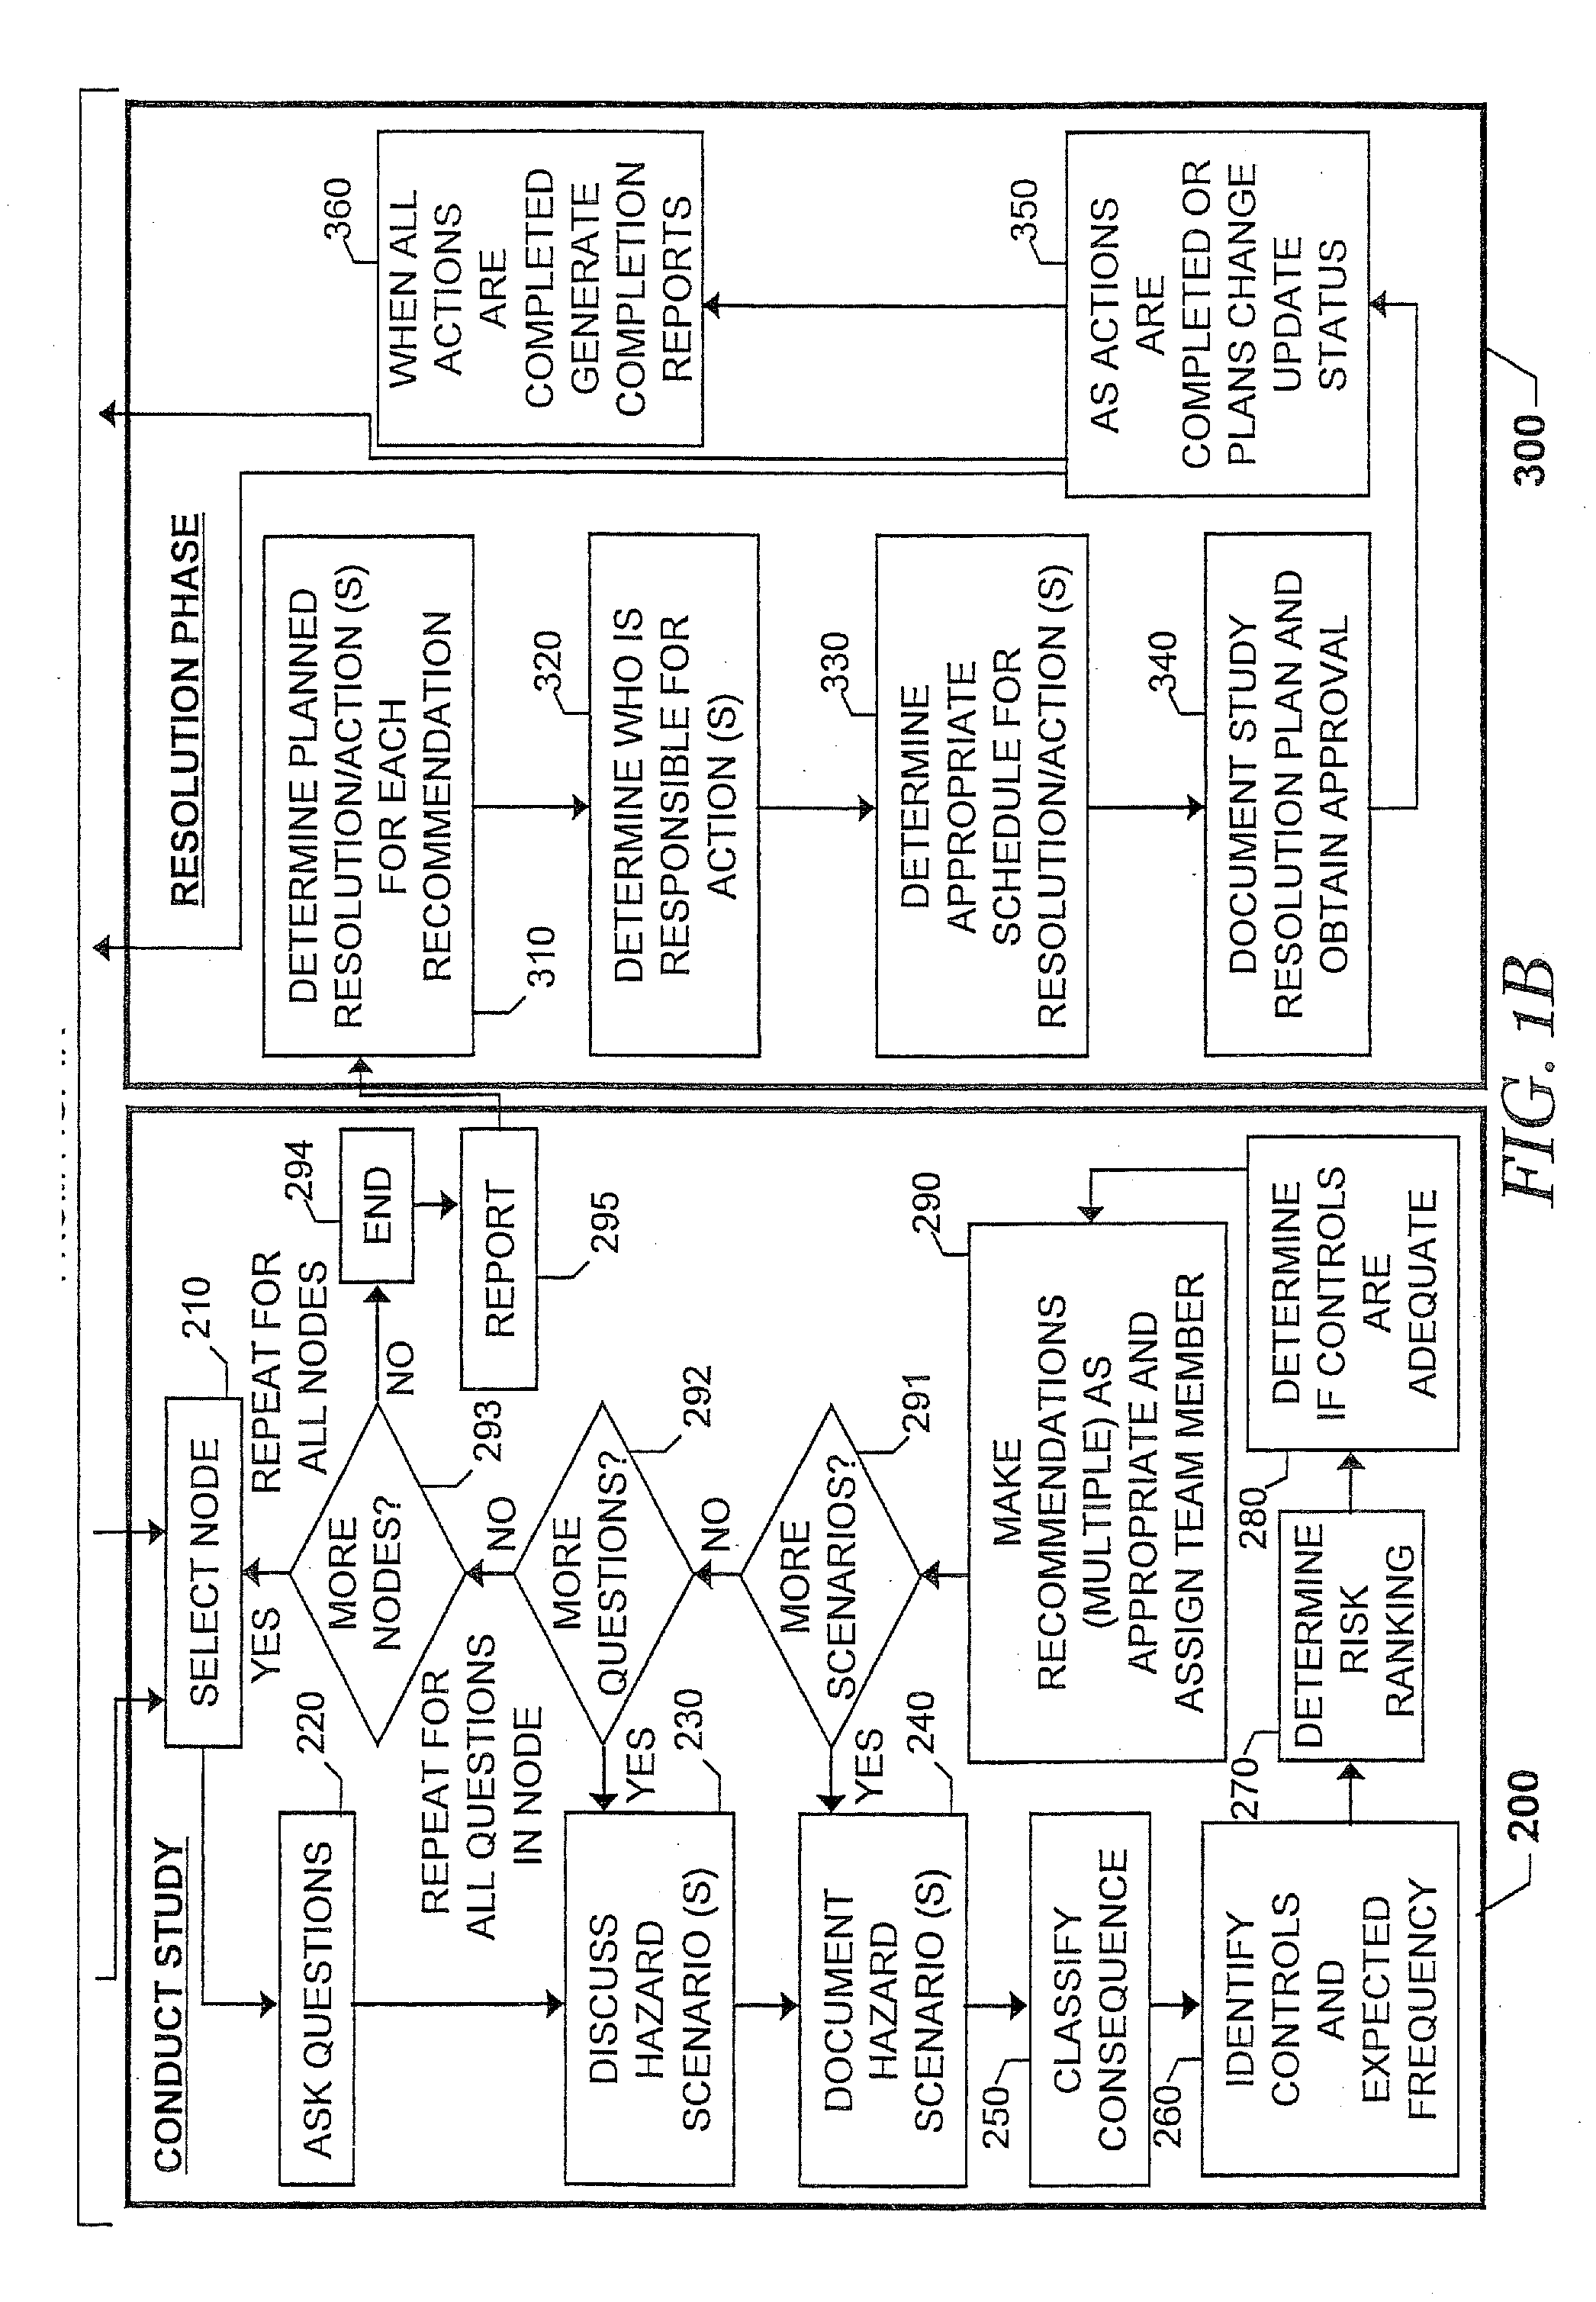 Systems, Methods and Computer Program Products for Preparing, Documenting and Reporting Chemical Process Hazard Analyses